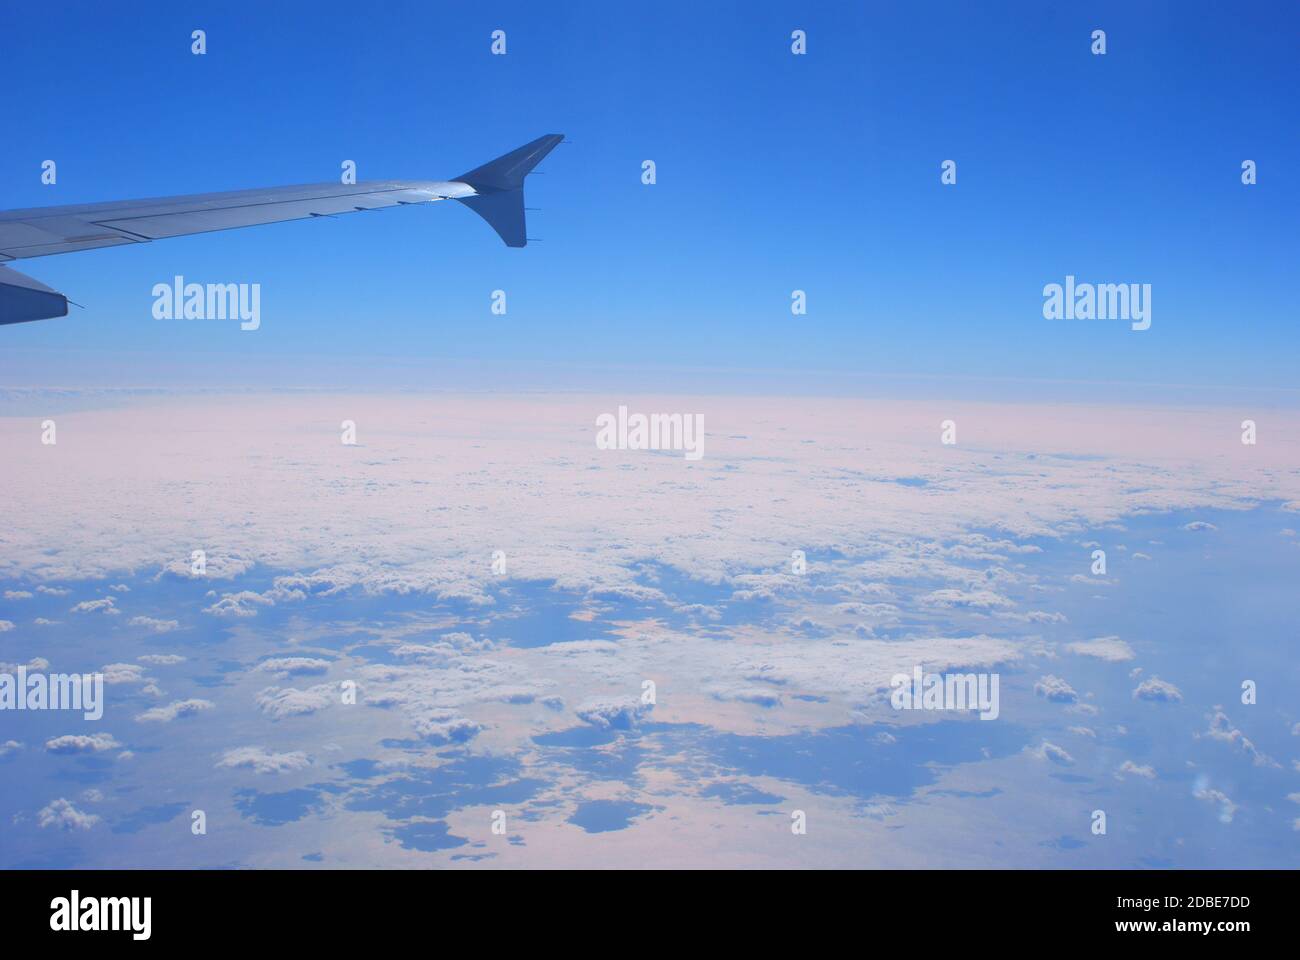 Landscape from an airplane. Shooting Location: Tokyo metropolitan area Stock Photo